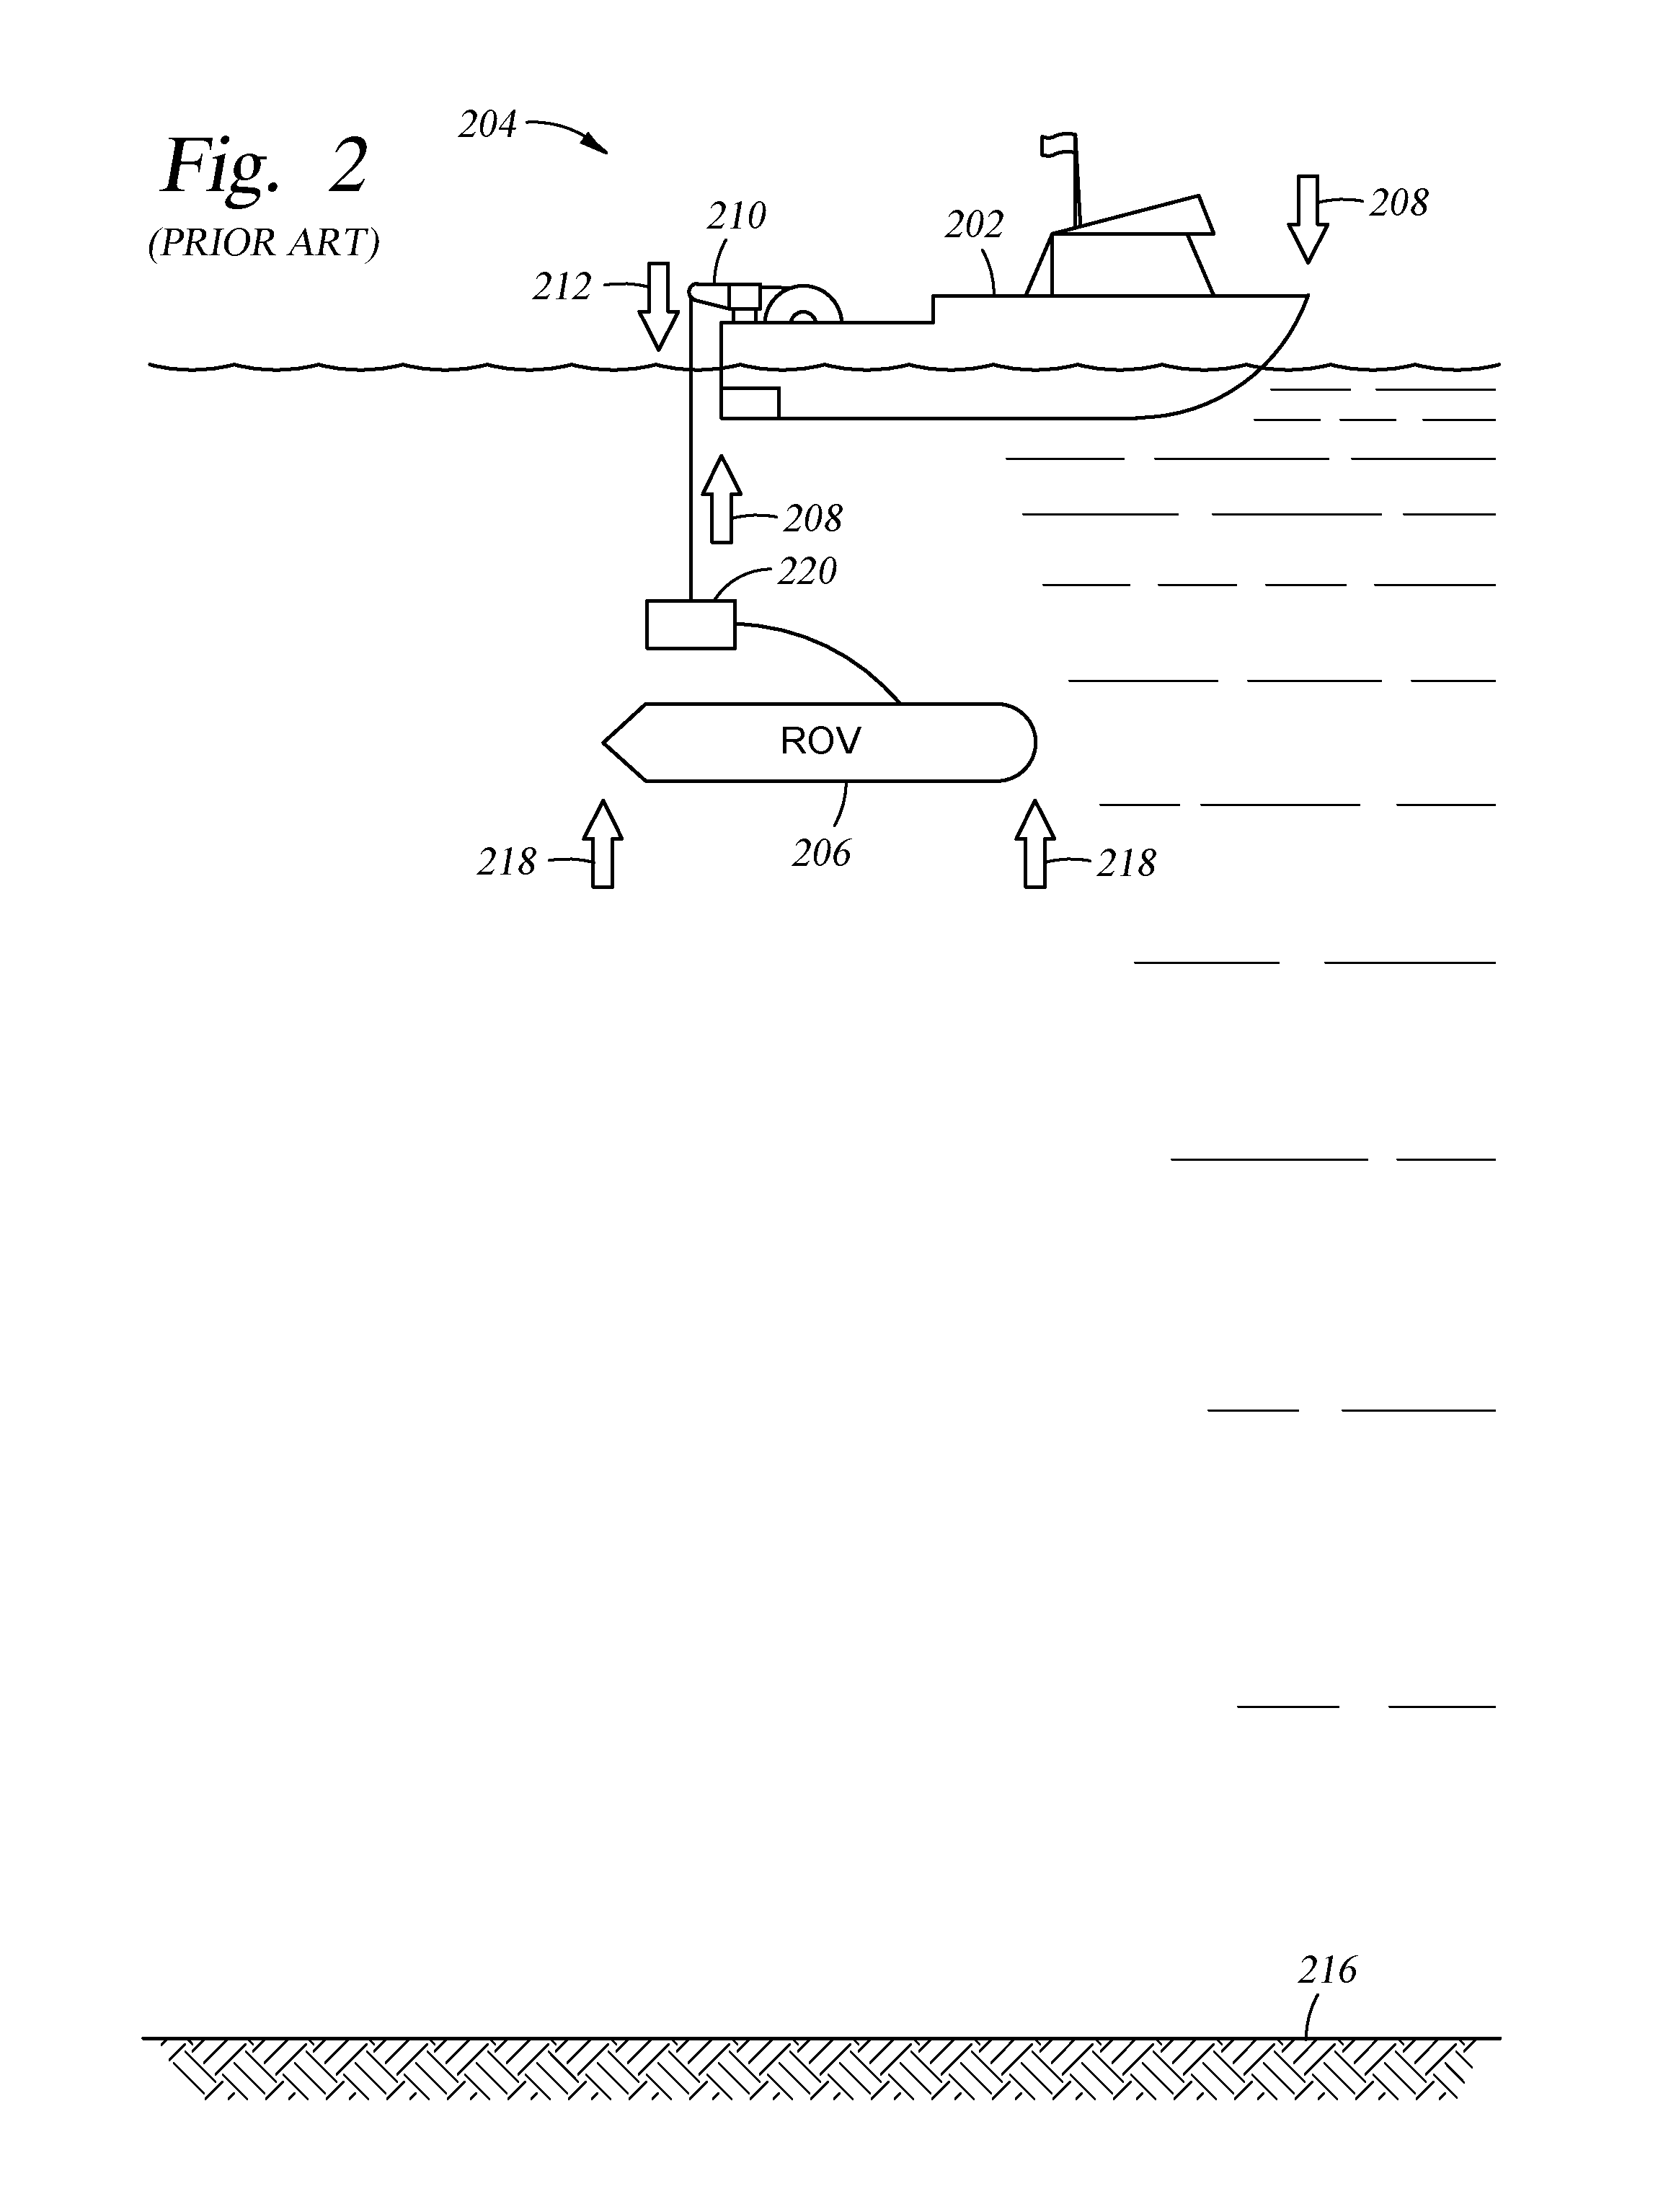 Motion compensation for relative motion between an object connected to a vessel and an object in the water